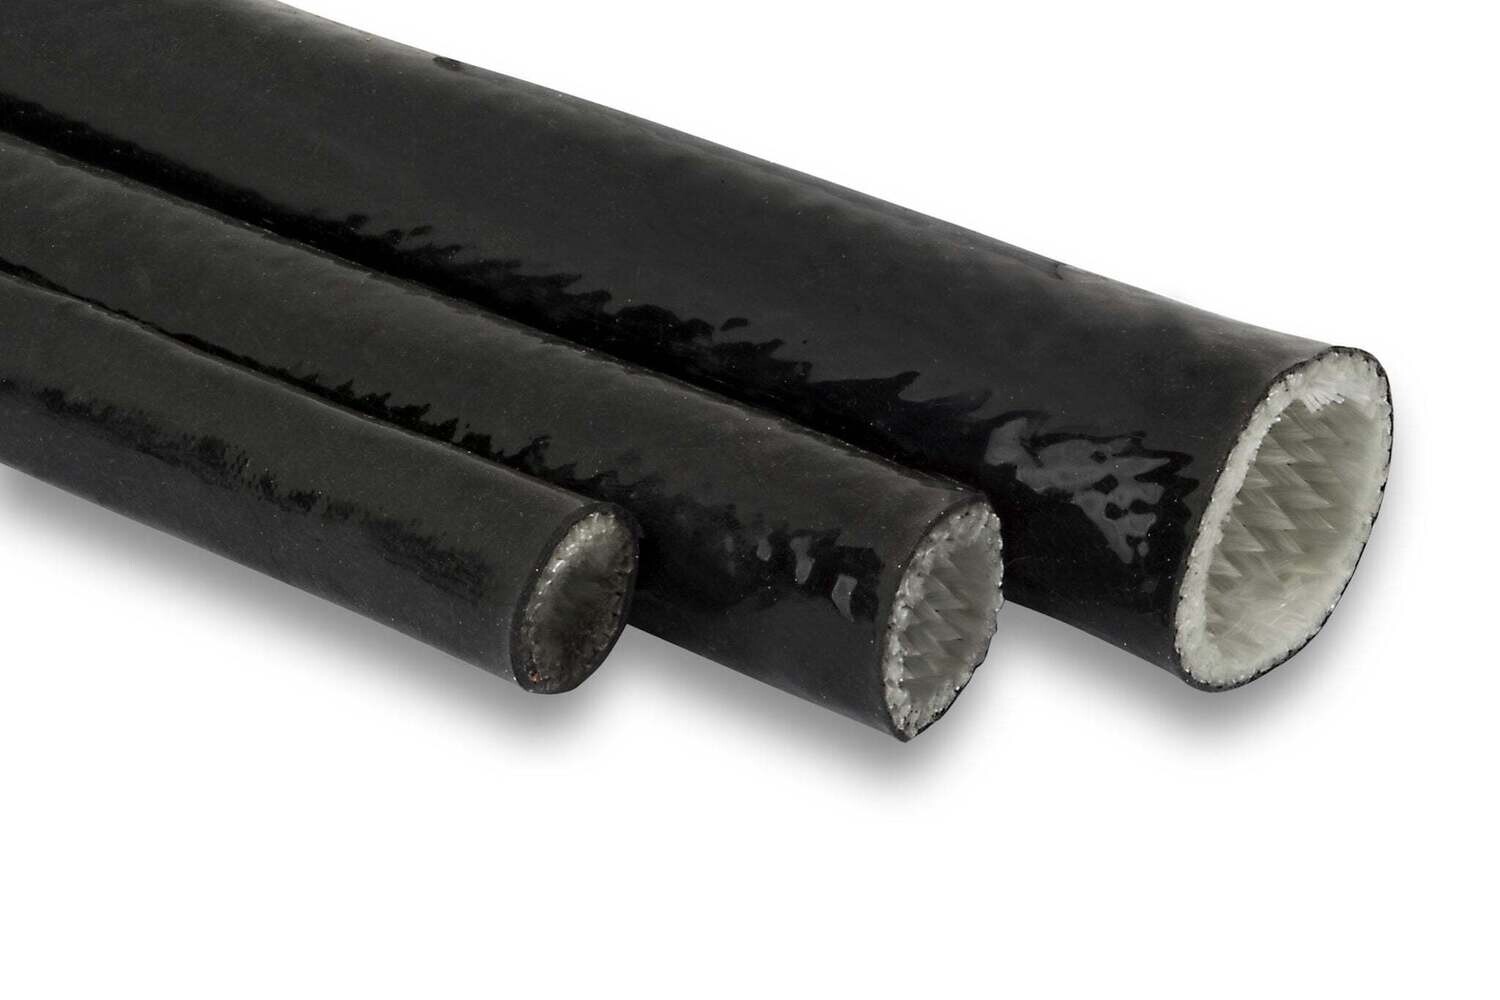 Black Silicon High Heat Sleeve - 7mm, 5.0m Multiple Qty will come on a continuous Roll